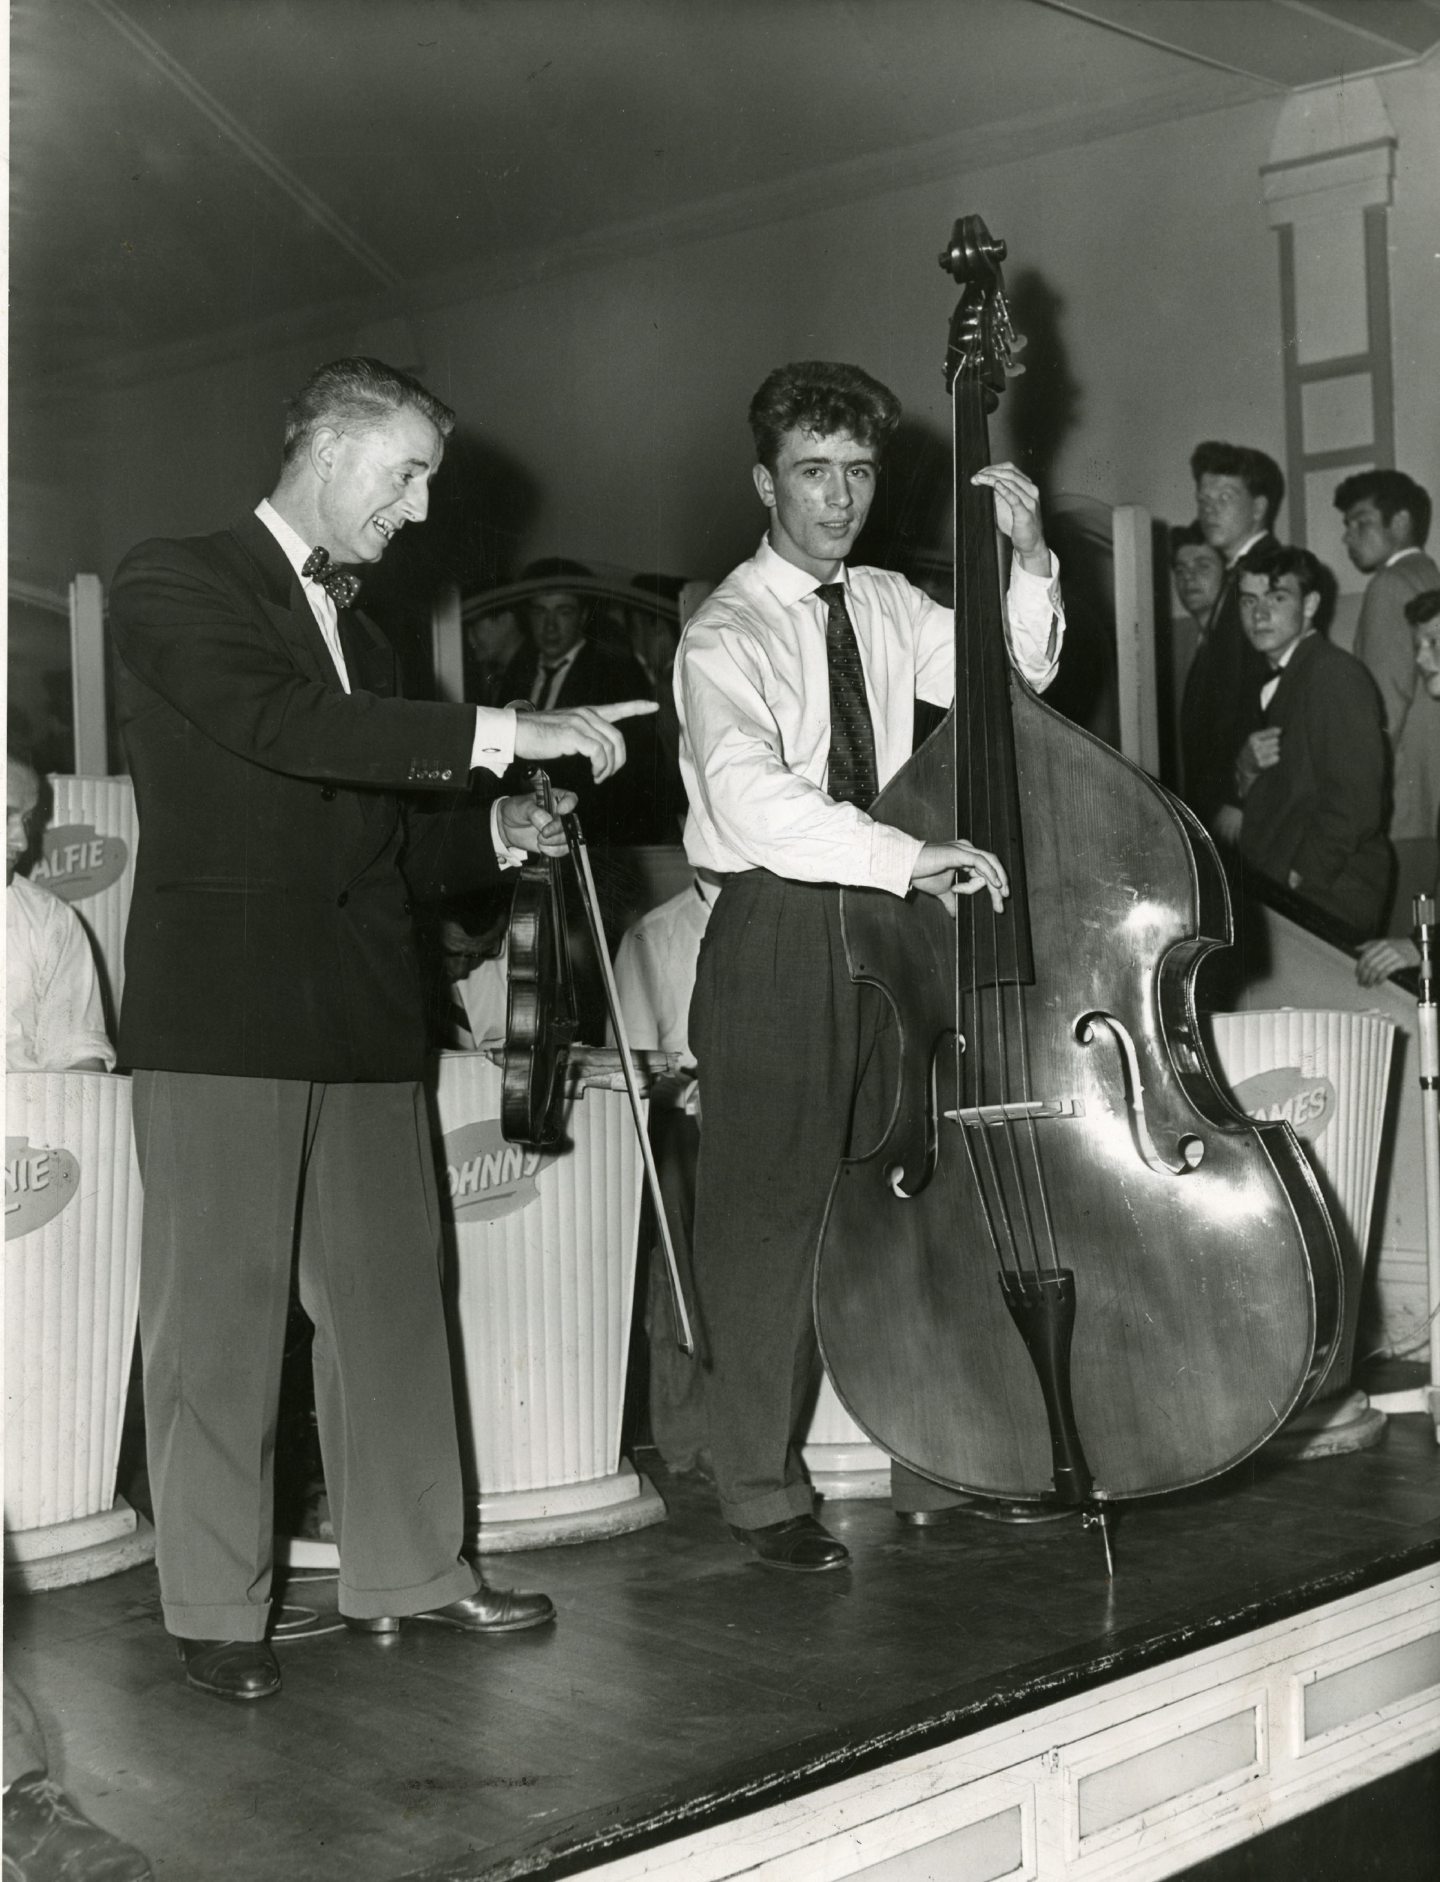 Andy Lothian performing alongside his son Andi at the Palais in 1958.